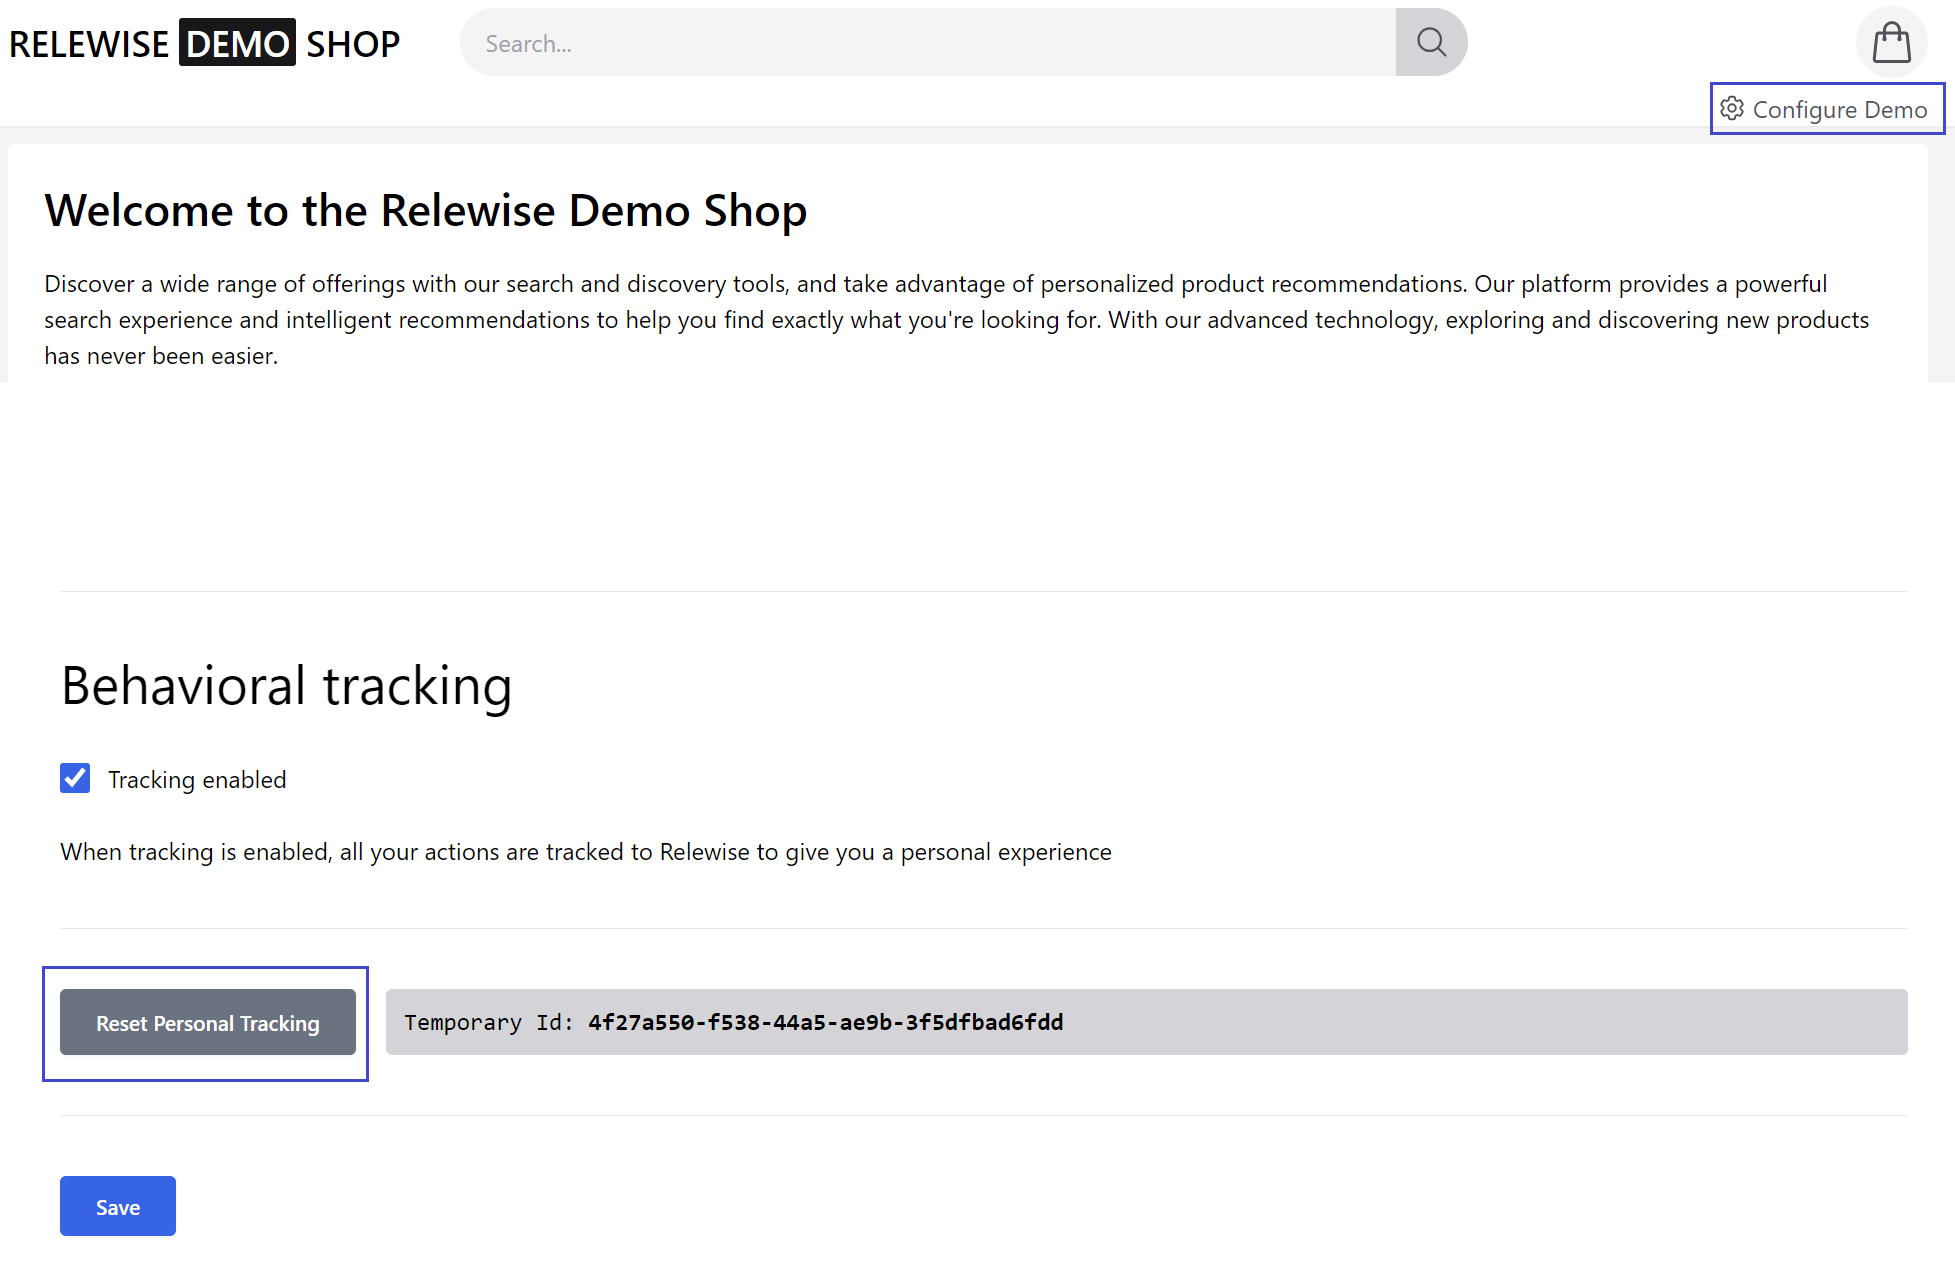 Resetting the Relewise Demo behavioral tracking